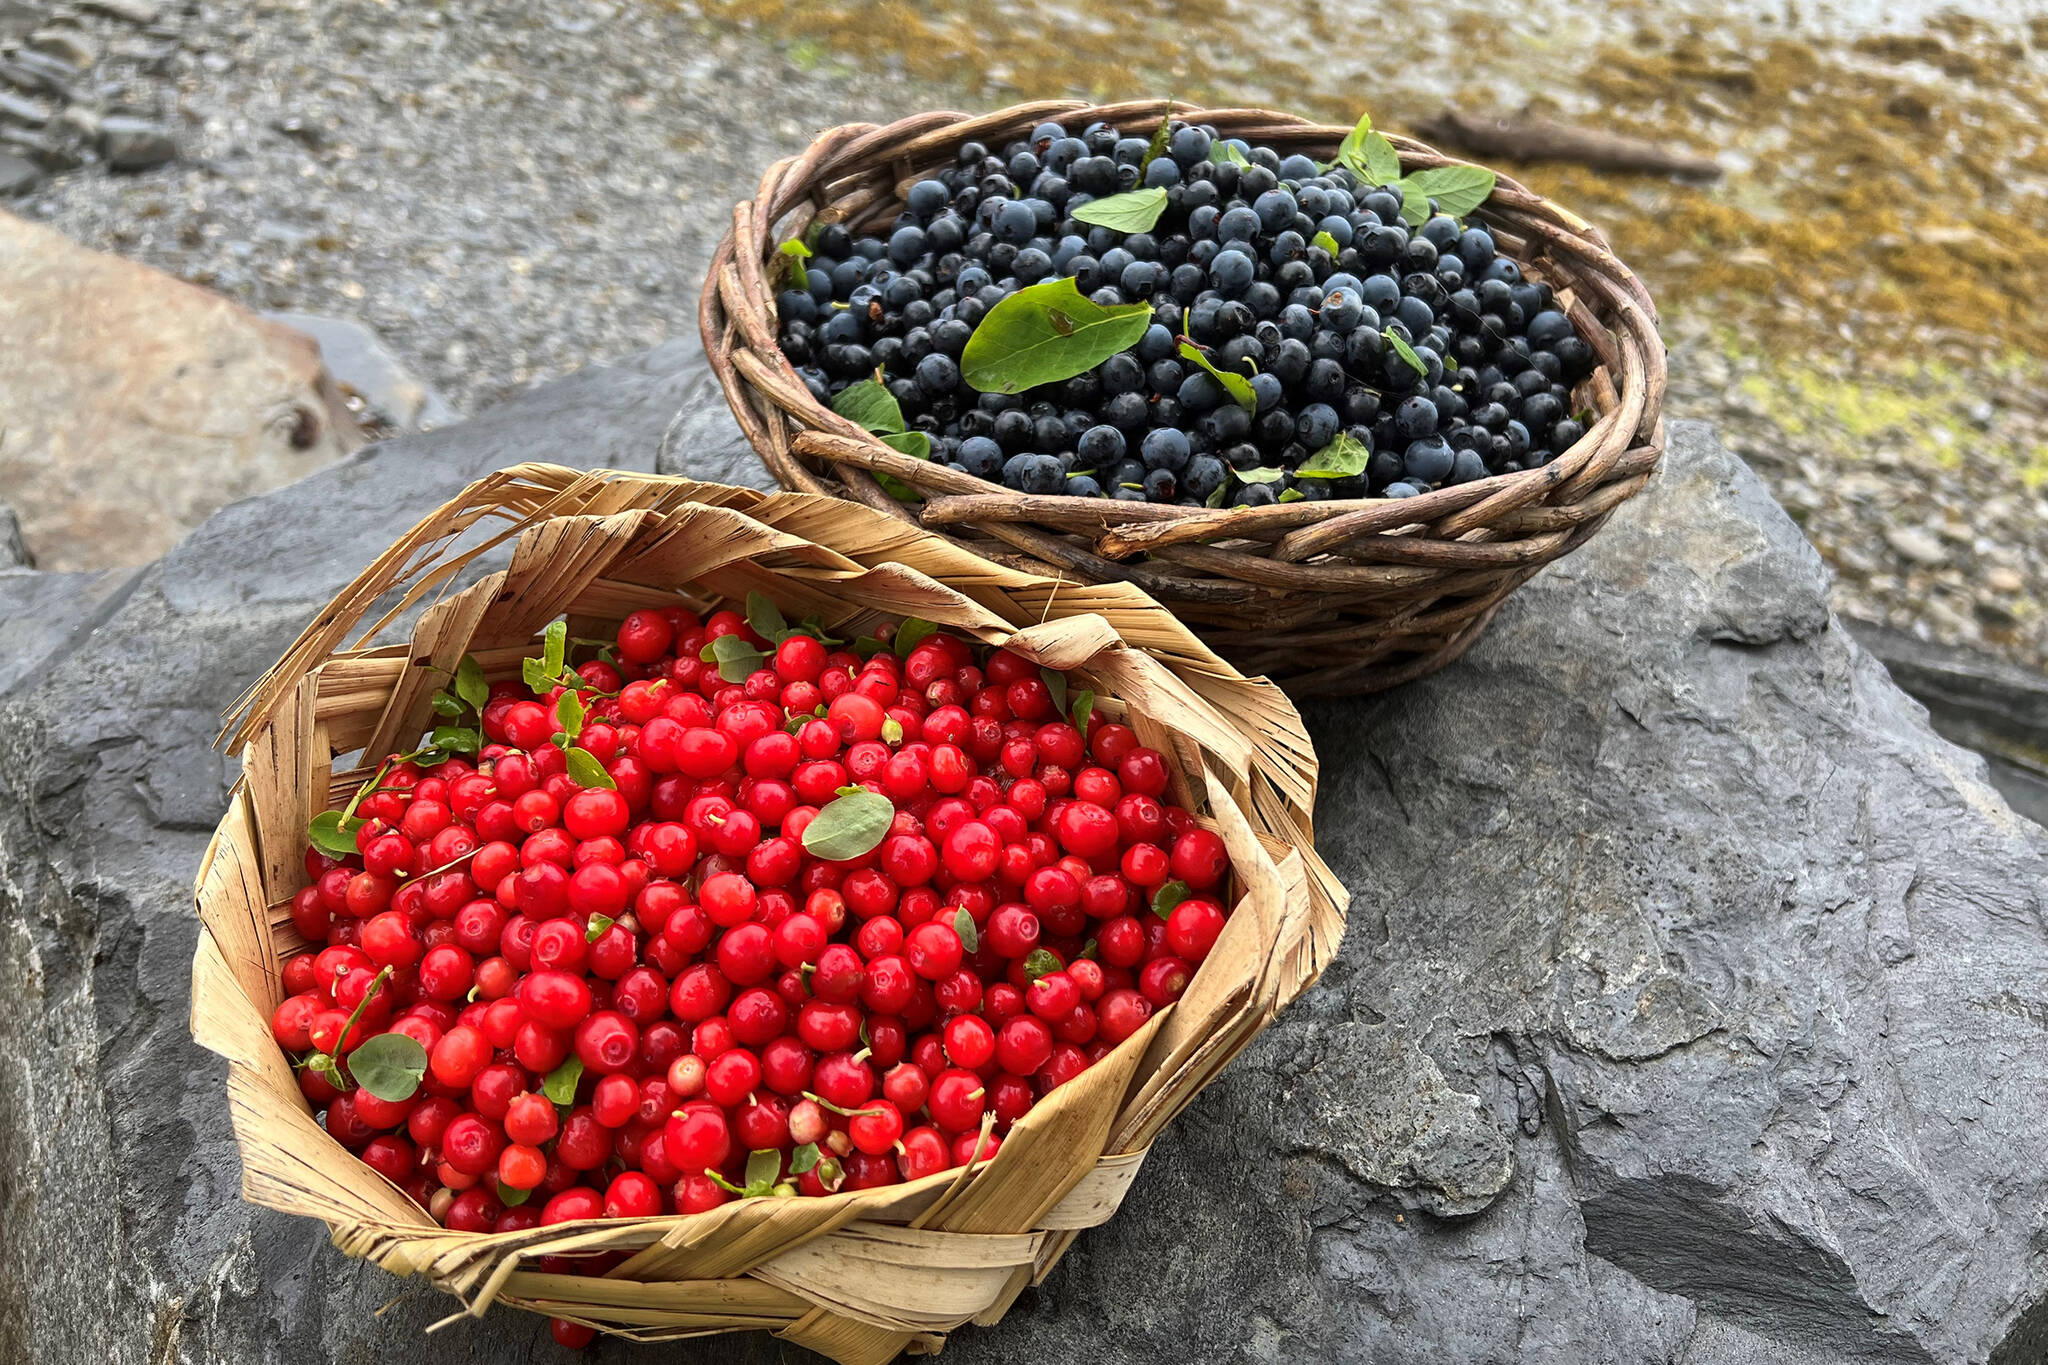 Red huckleberries and blueberries in Wrangell at Mickey’s Fishcamp. (Courtesy Photo/ Vivian Faith Prescott)